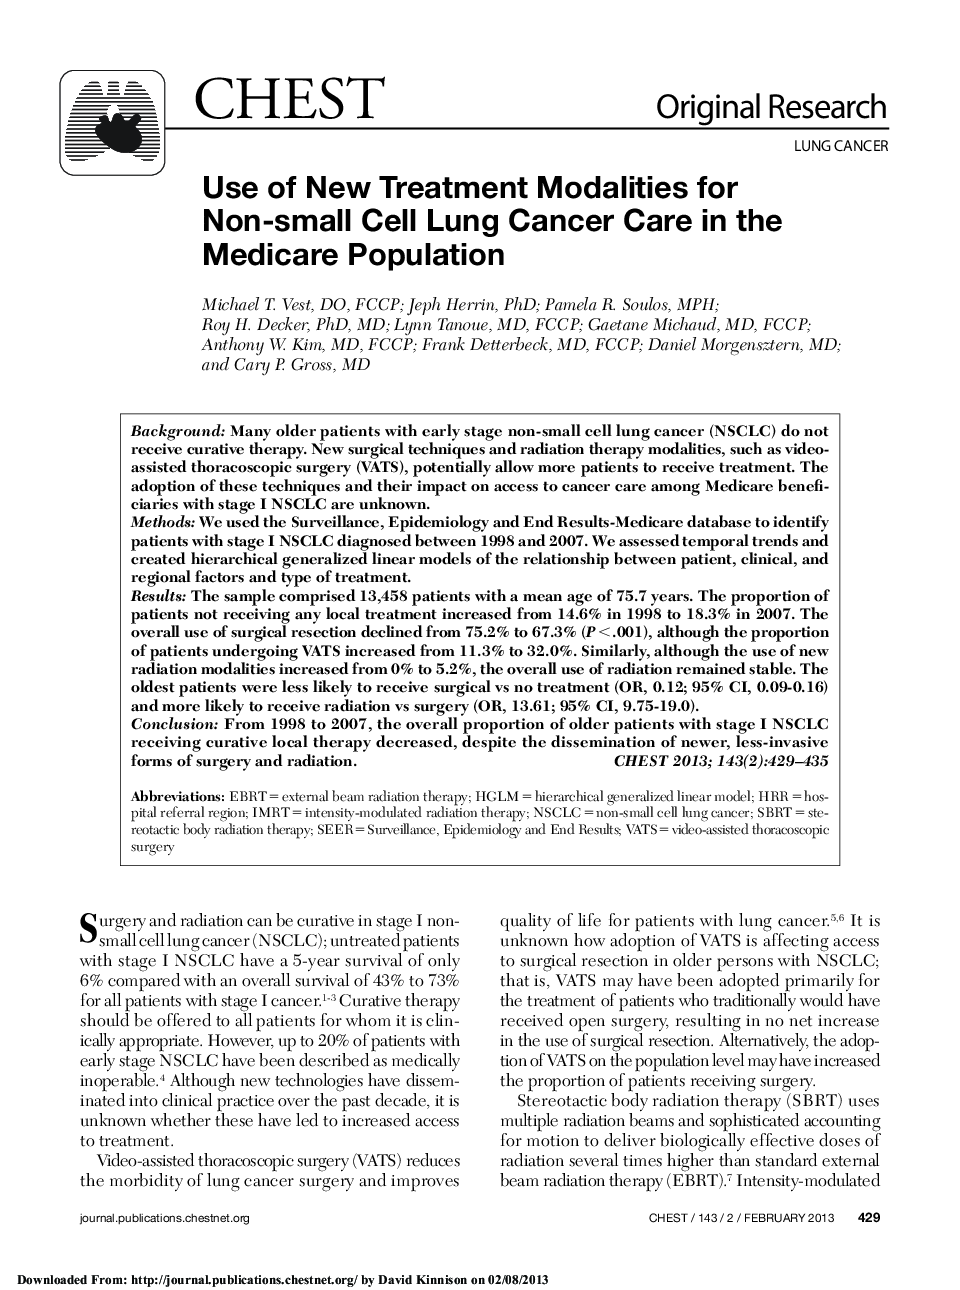 Use of New Treatment Modalities for Non-small Cell Lung Cancer Care in the Medicare Population